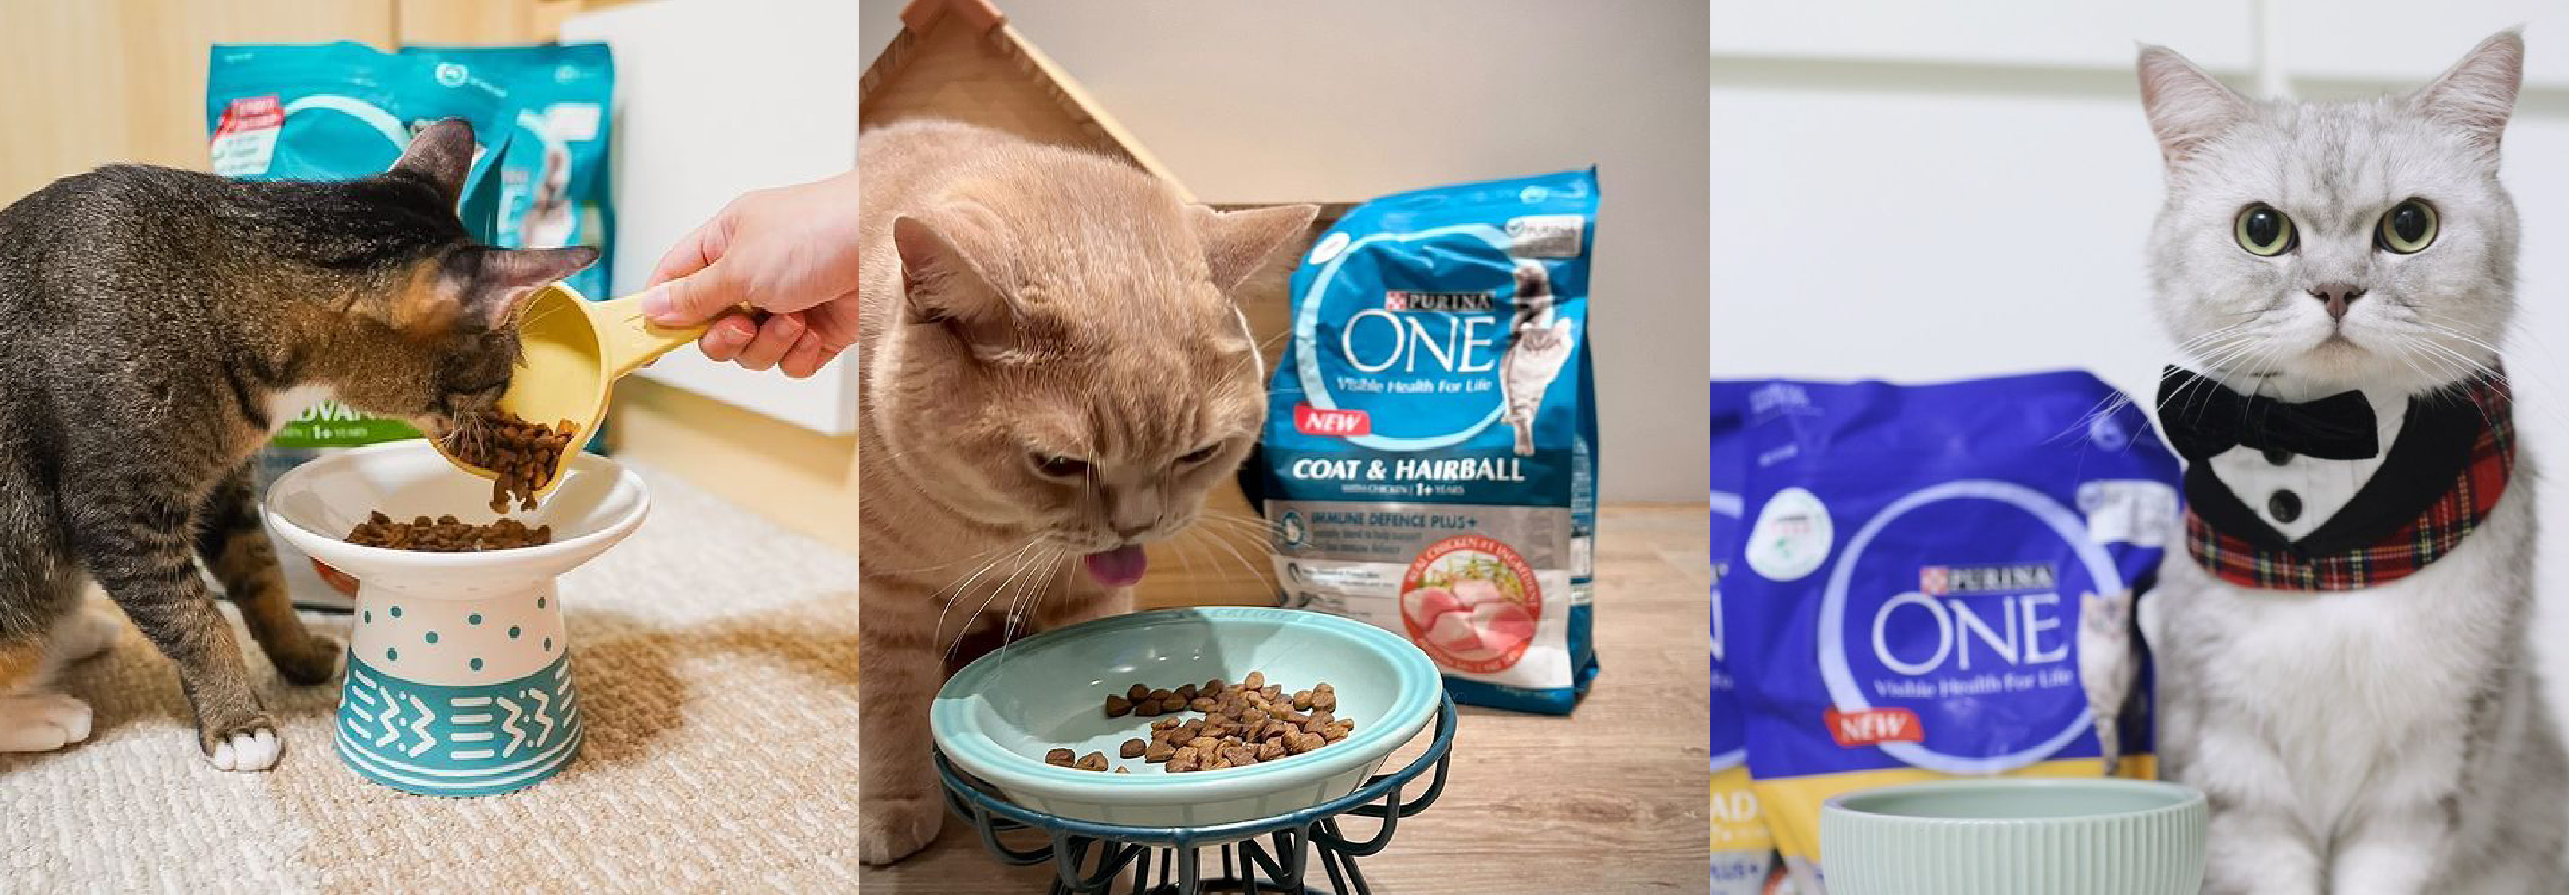 PURINA ONE® 3 Week Challenge | Cat owners experiences with Immune Defence+ Improvement in immunity and overall health